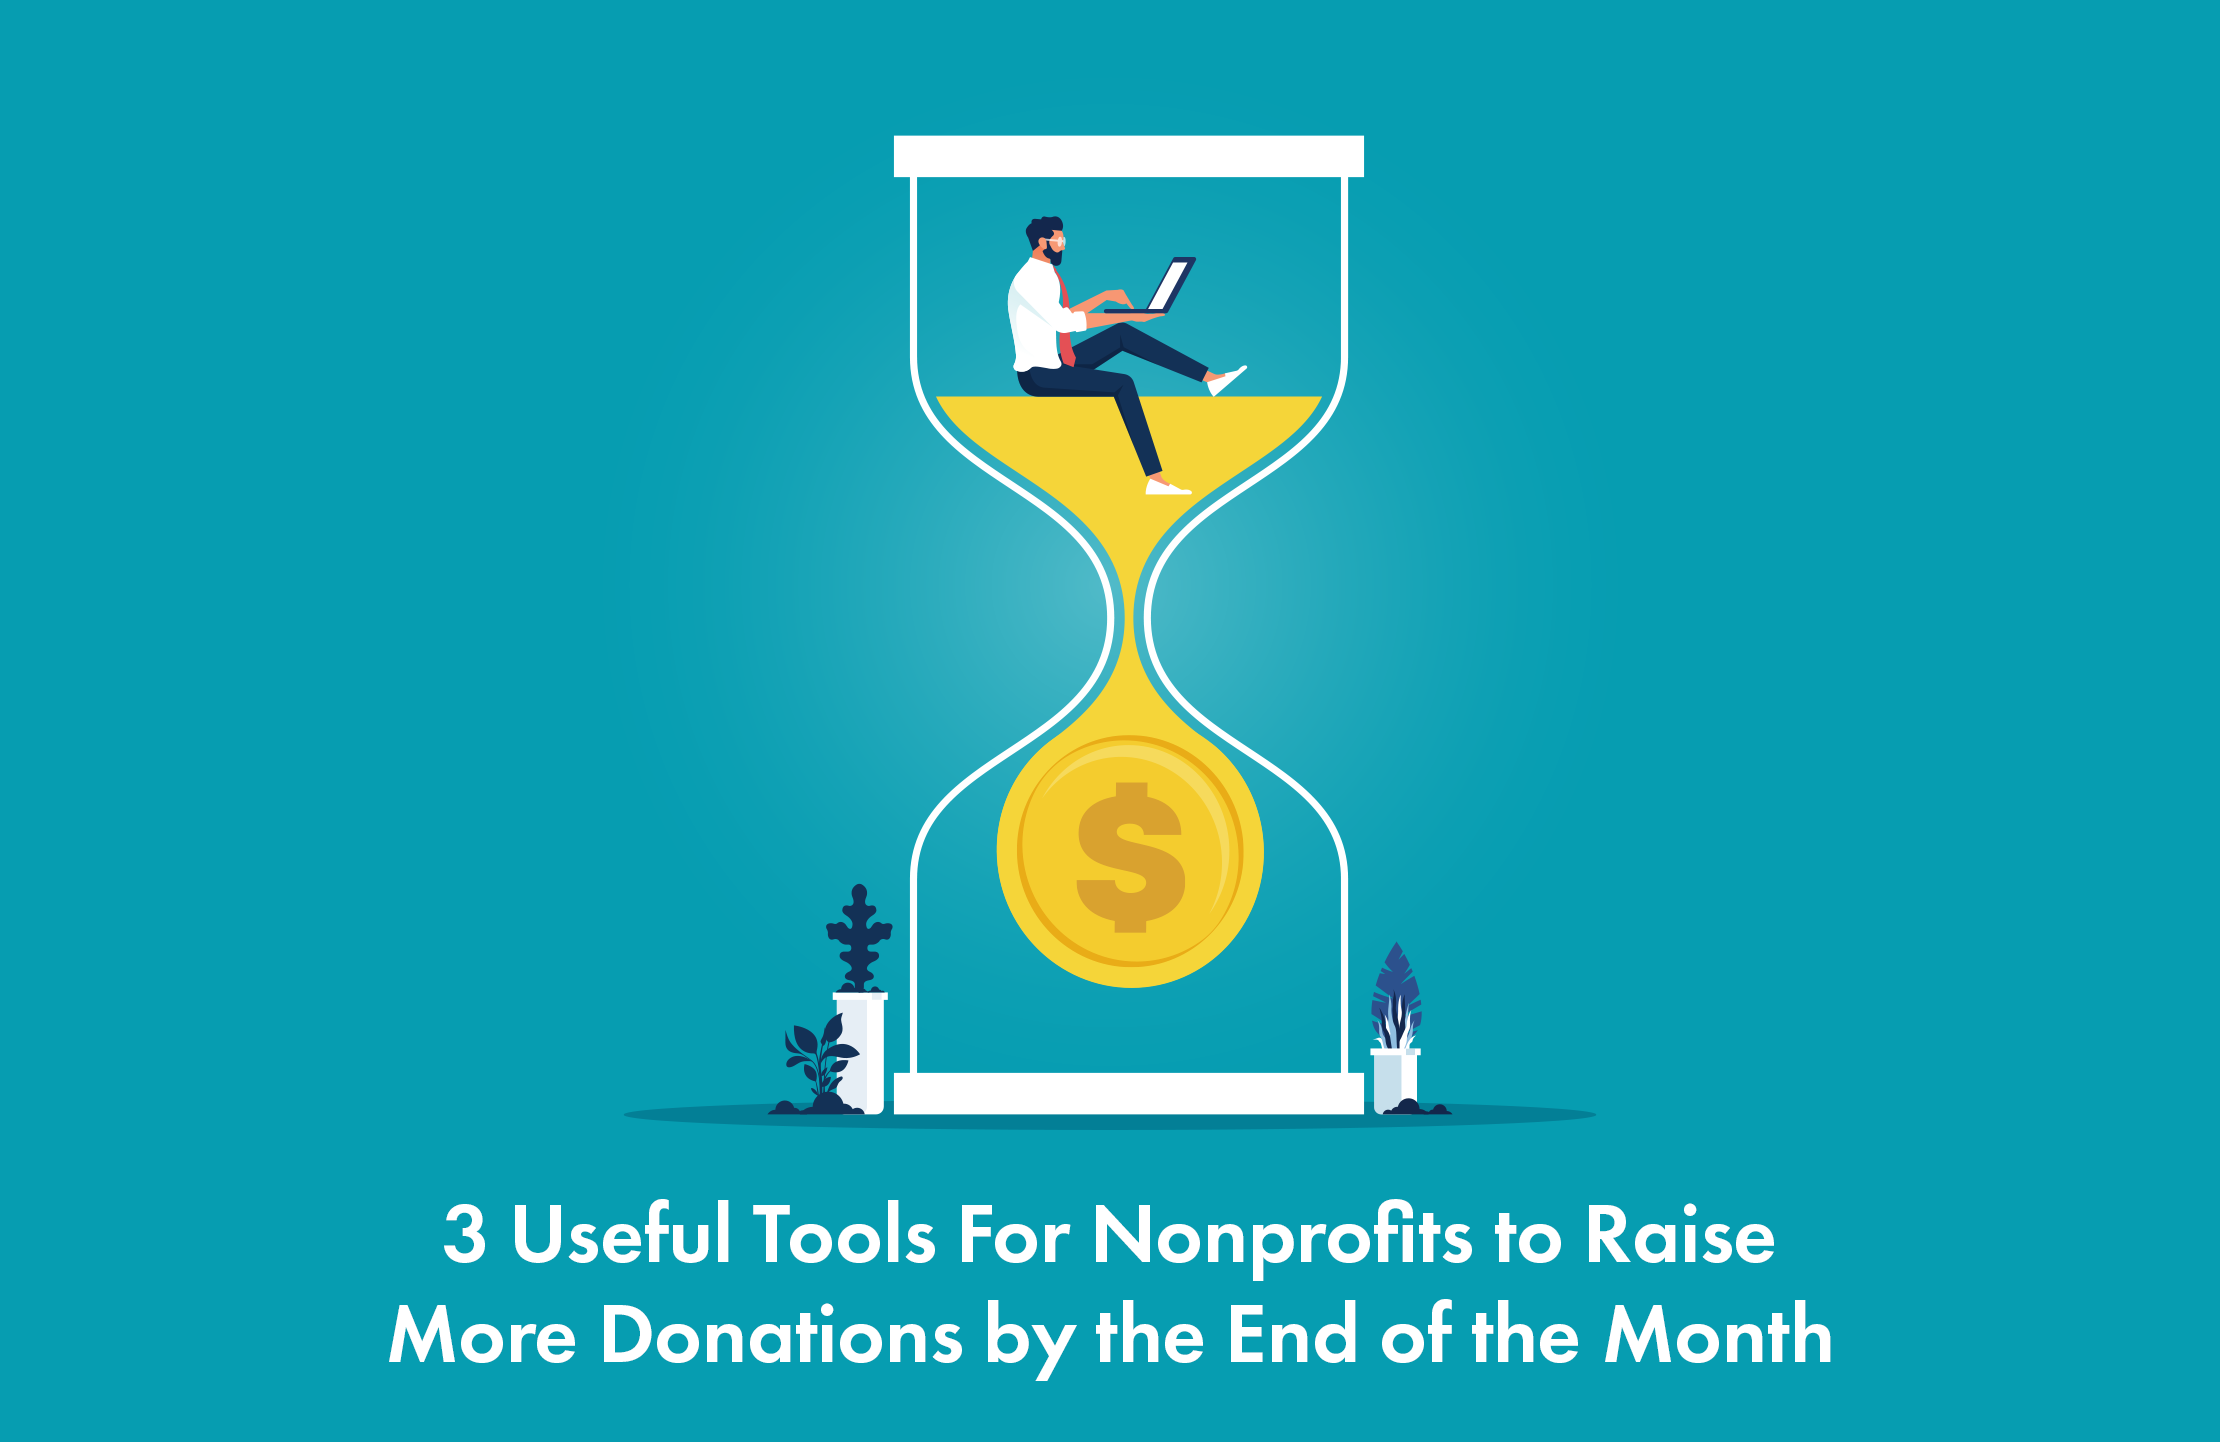 3 Useful Tools For Nonprofits to Raise More Donations by the End of the Month